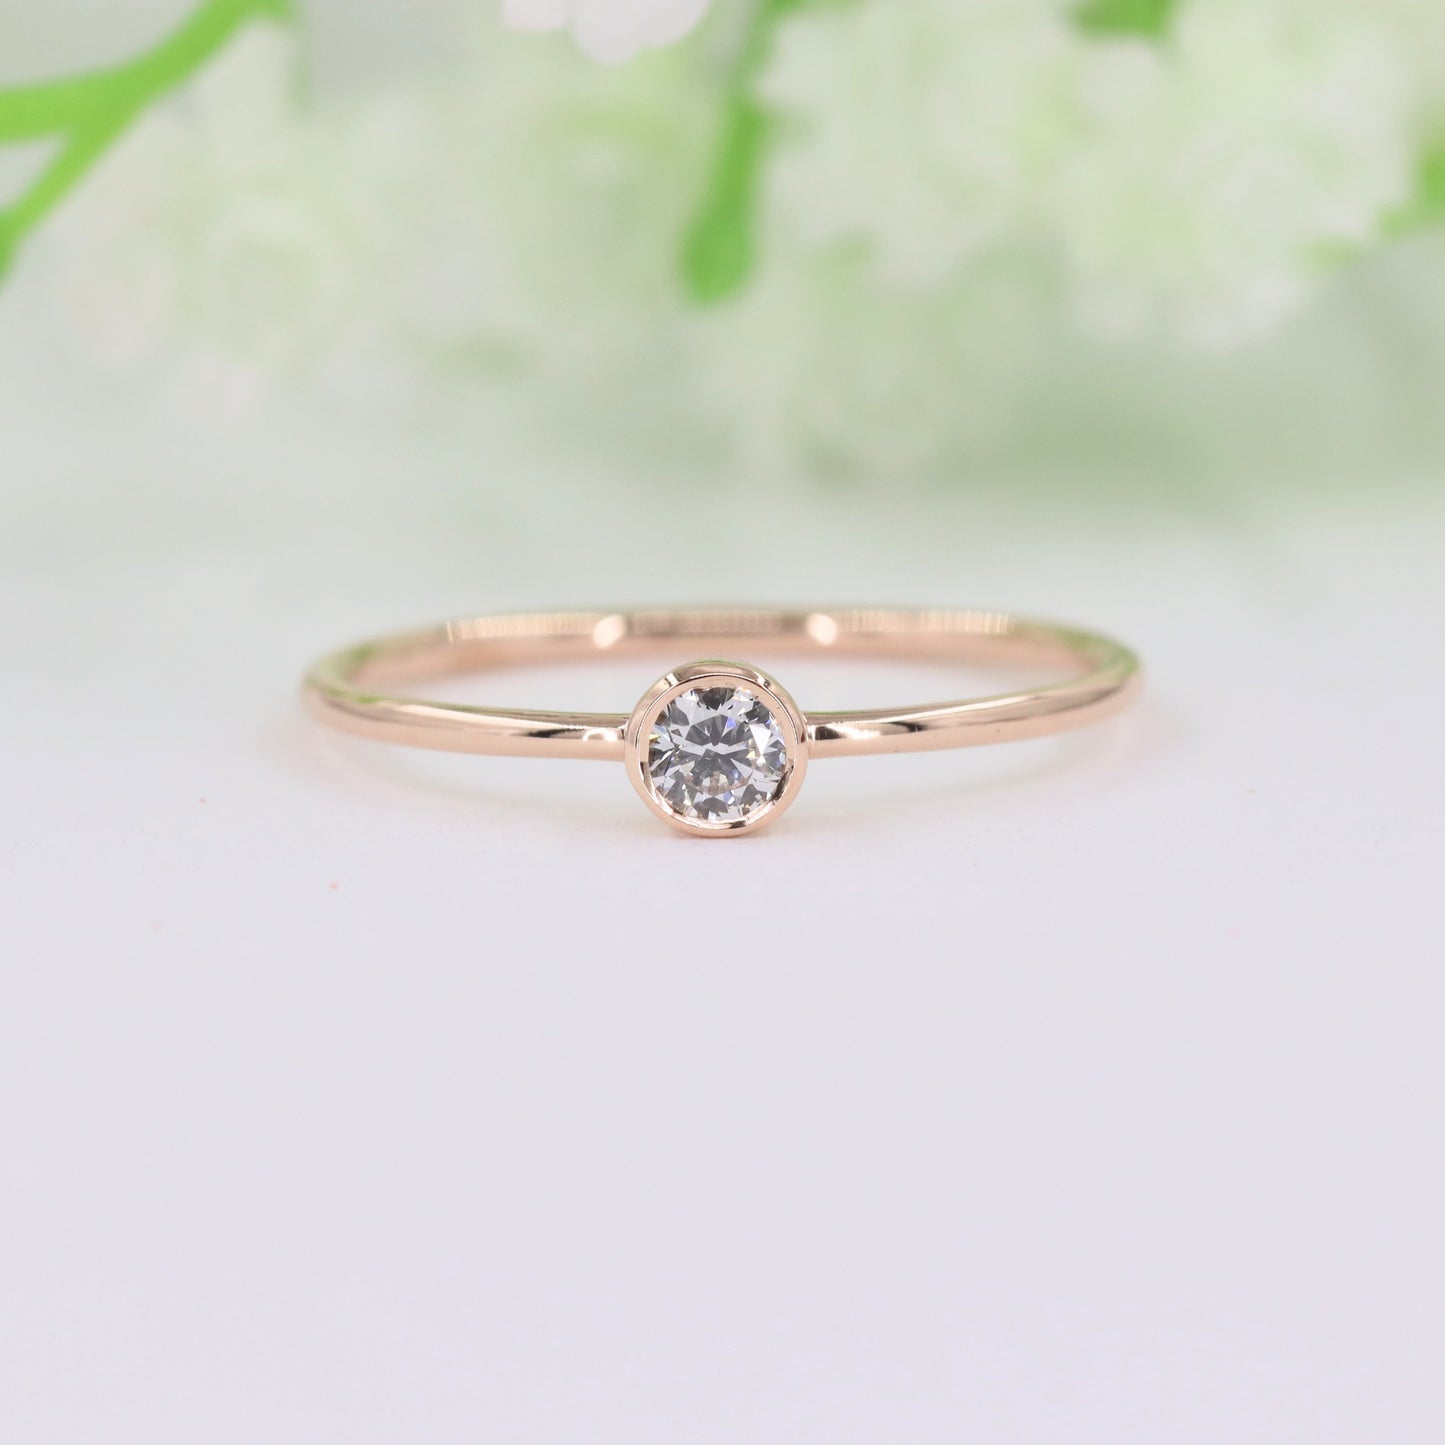 14K gold Straight Bezel .03ct Diamond Stackable Ring/ Dainty Ring/ Simple Engagement Ring/ Single Diamond Wedding Ring/Gift for her